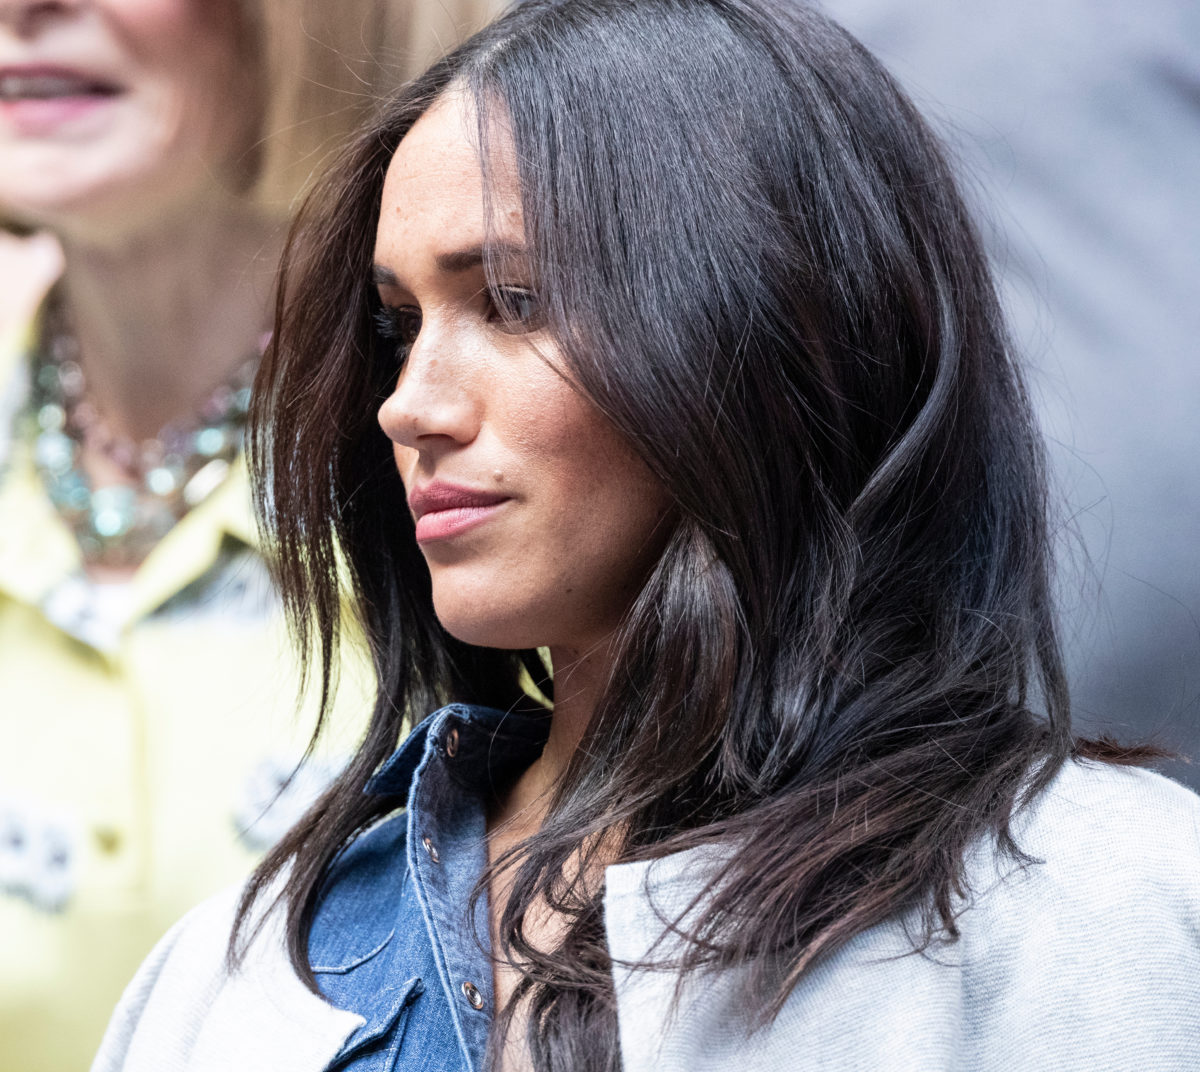 New Reports Reveal the Very Bold Move Meghan Markle Made After Queen Elizabeth's Funeral